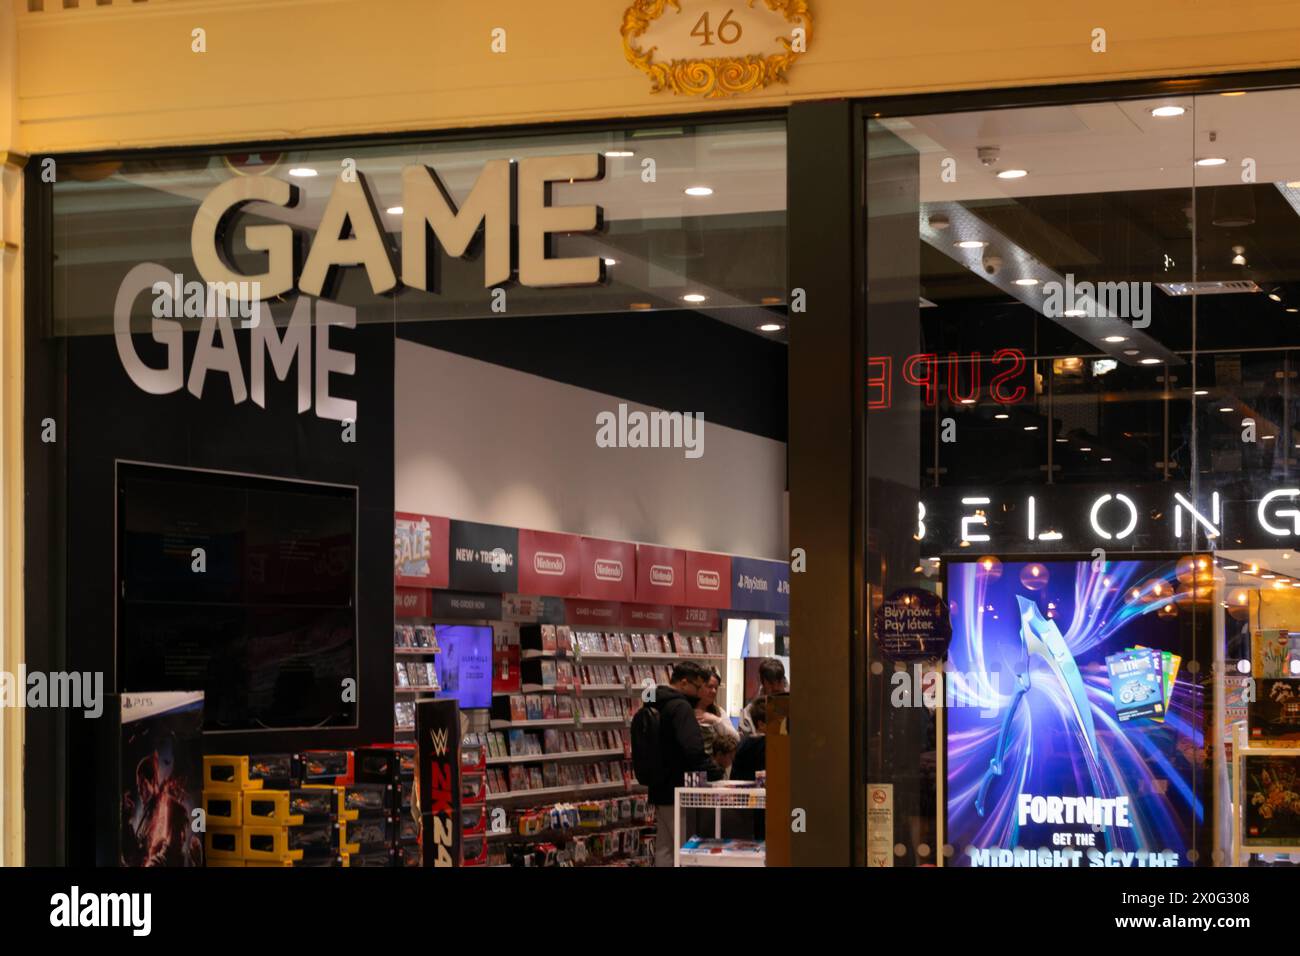 Game store Trafford Centre, Greater Manchester UK. Shopfront with Game logo Stock Photo